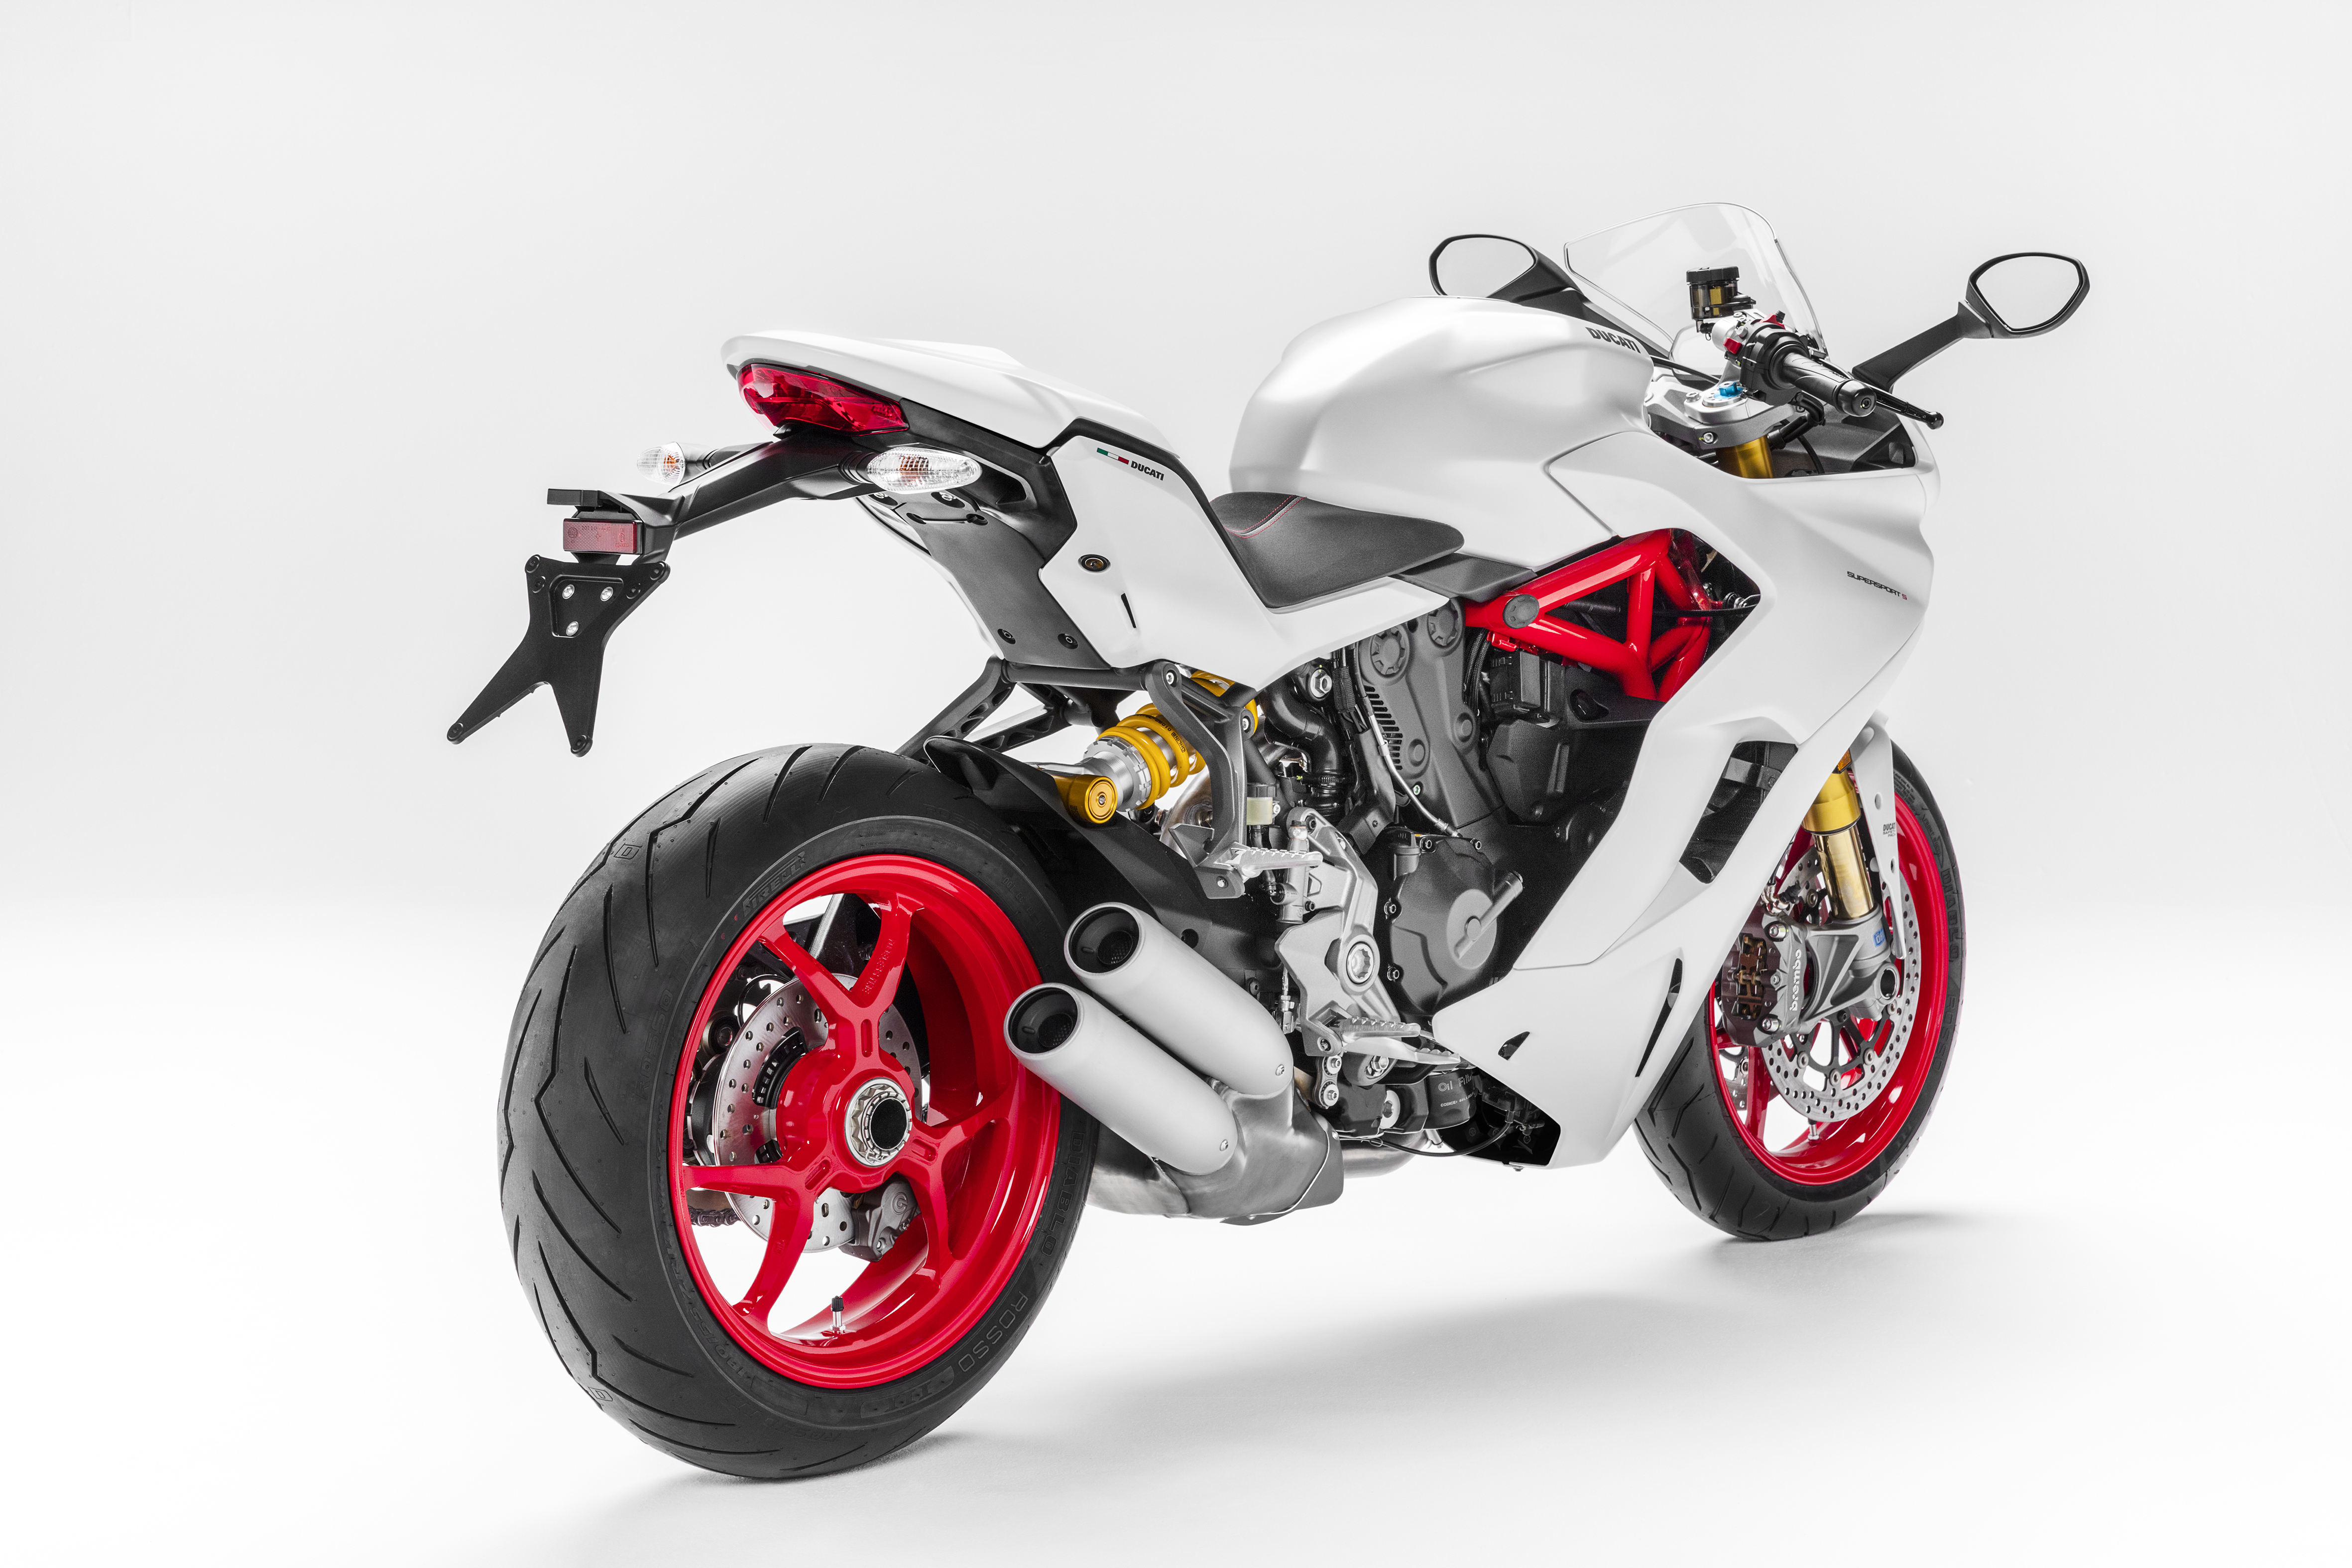 Ducati Supersport and Supersport S debut